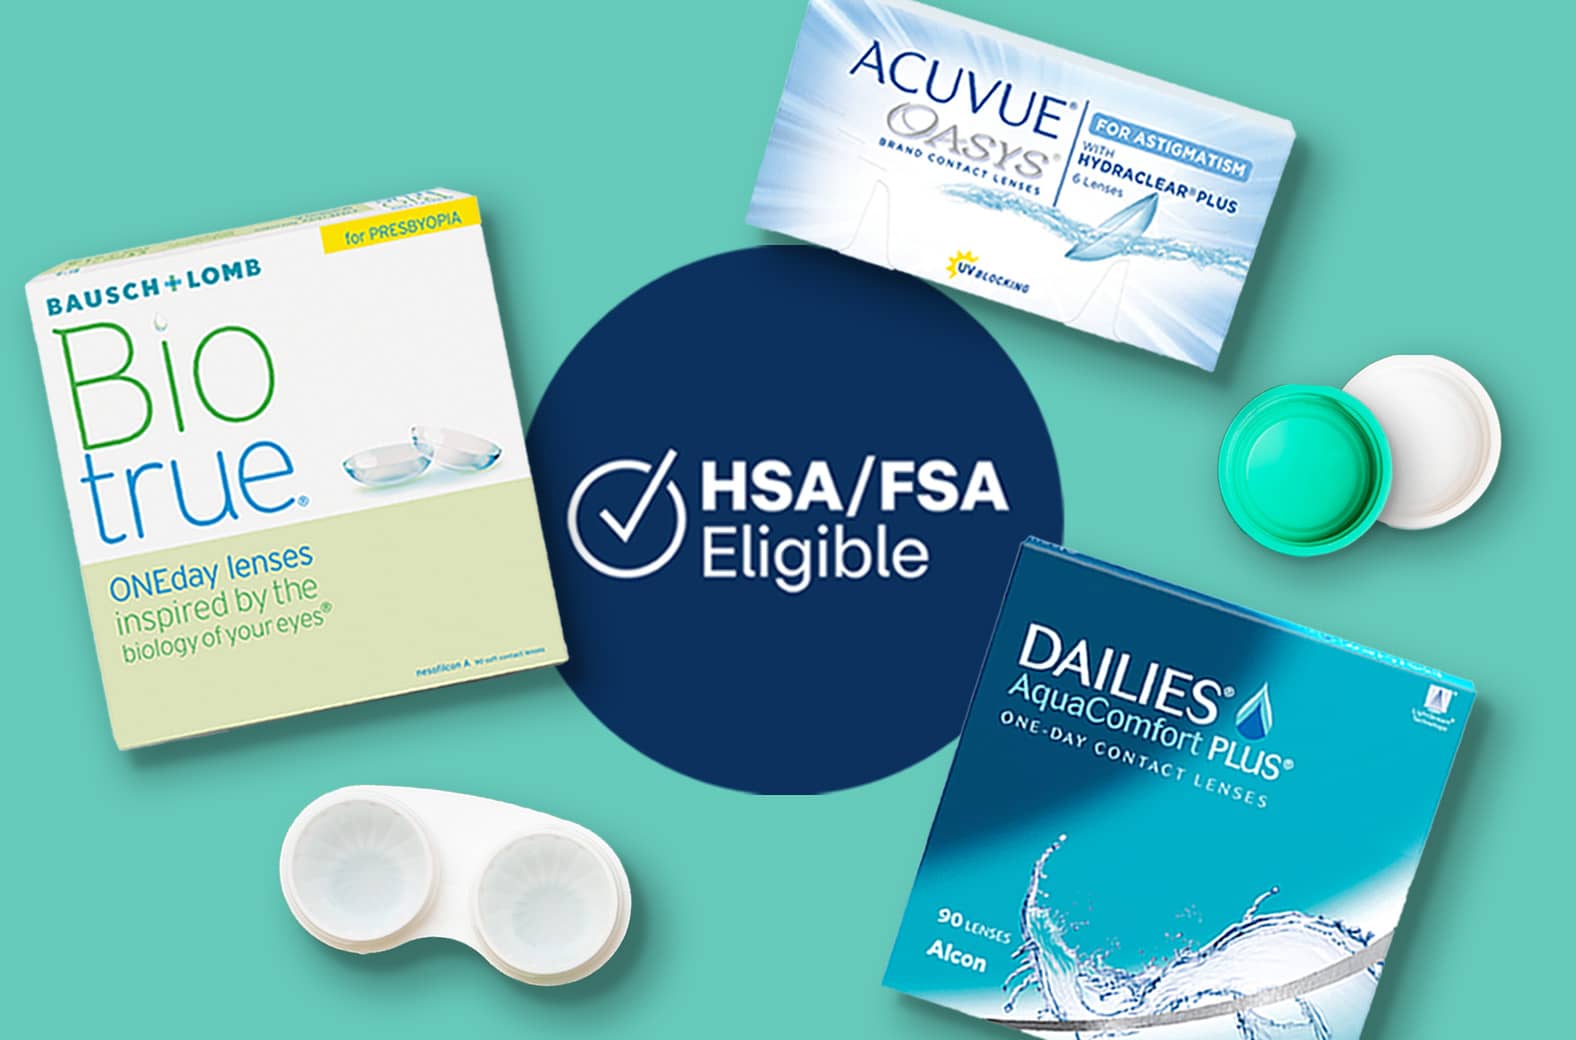 Dailies, Acuvue Oasys and Biotrue contacts, HSA/FSA eligible logo